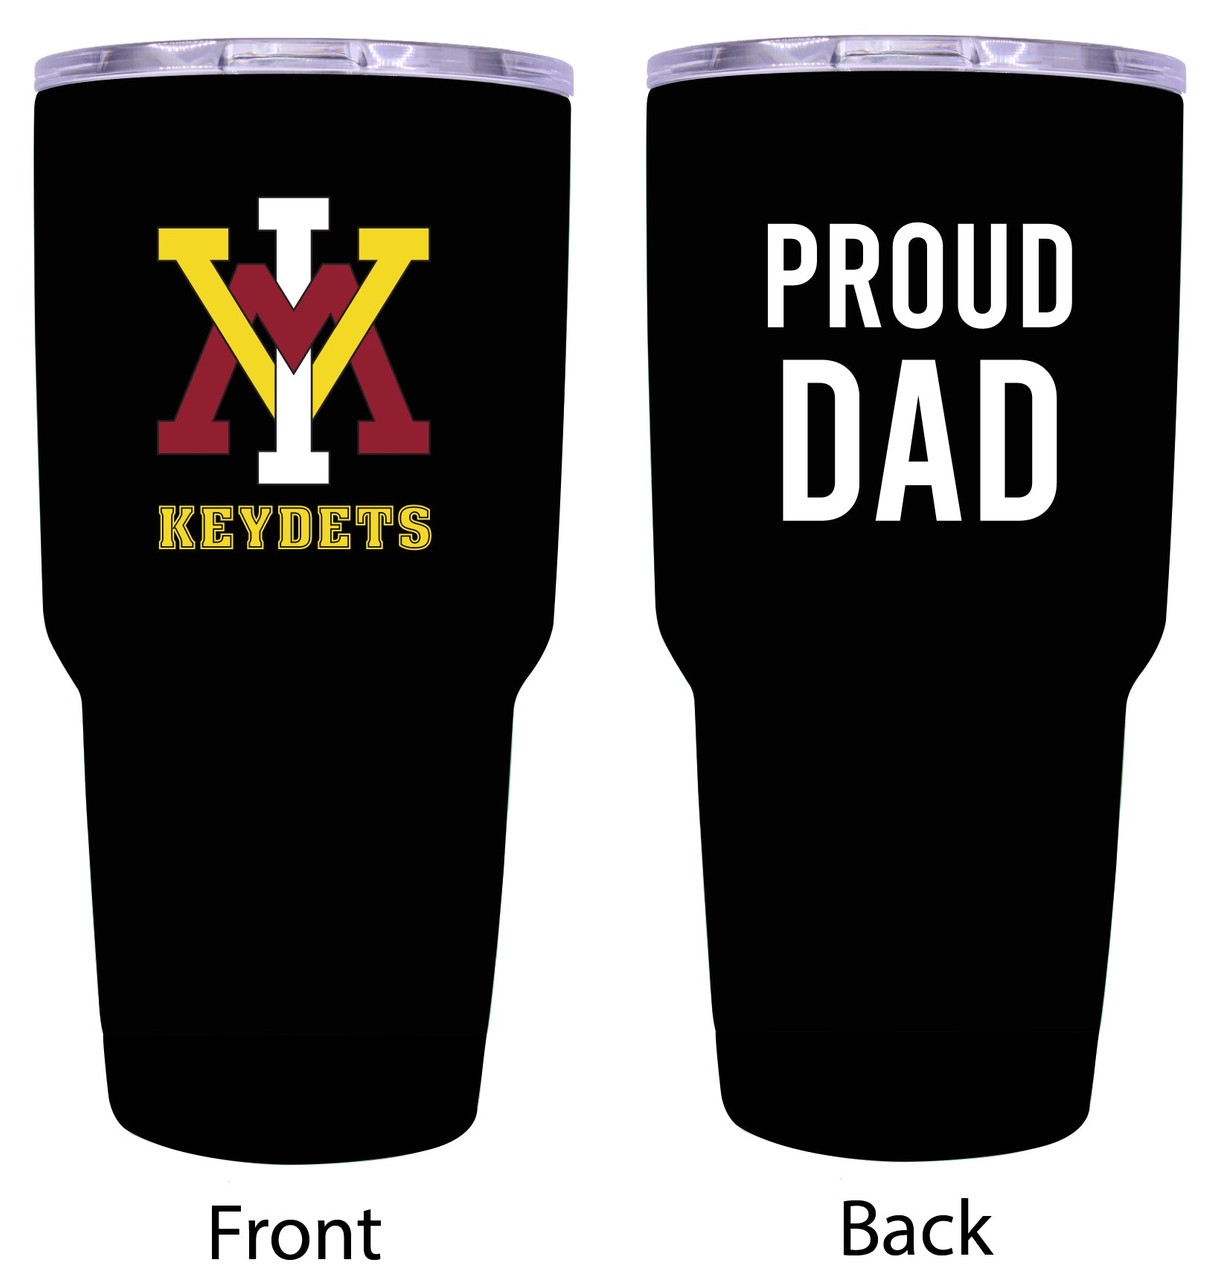 VMI Keydets Proud Dad 24 oz Insulated Stainless Steel Tumblers Black.